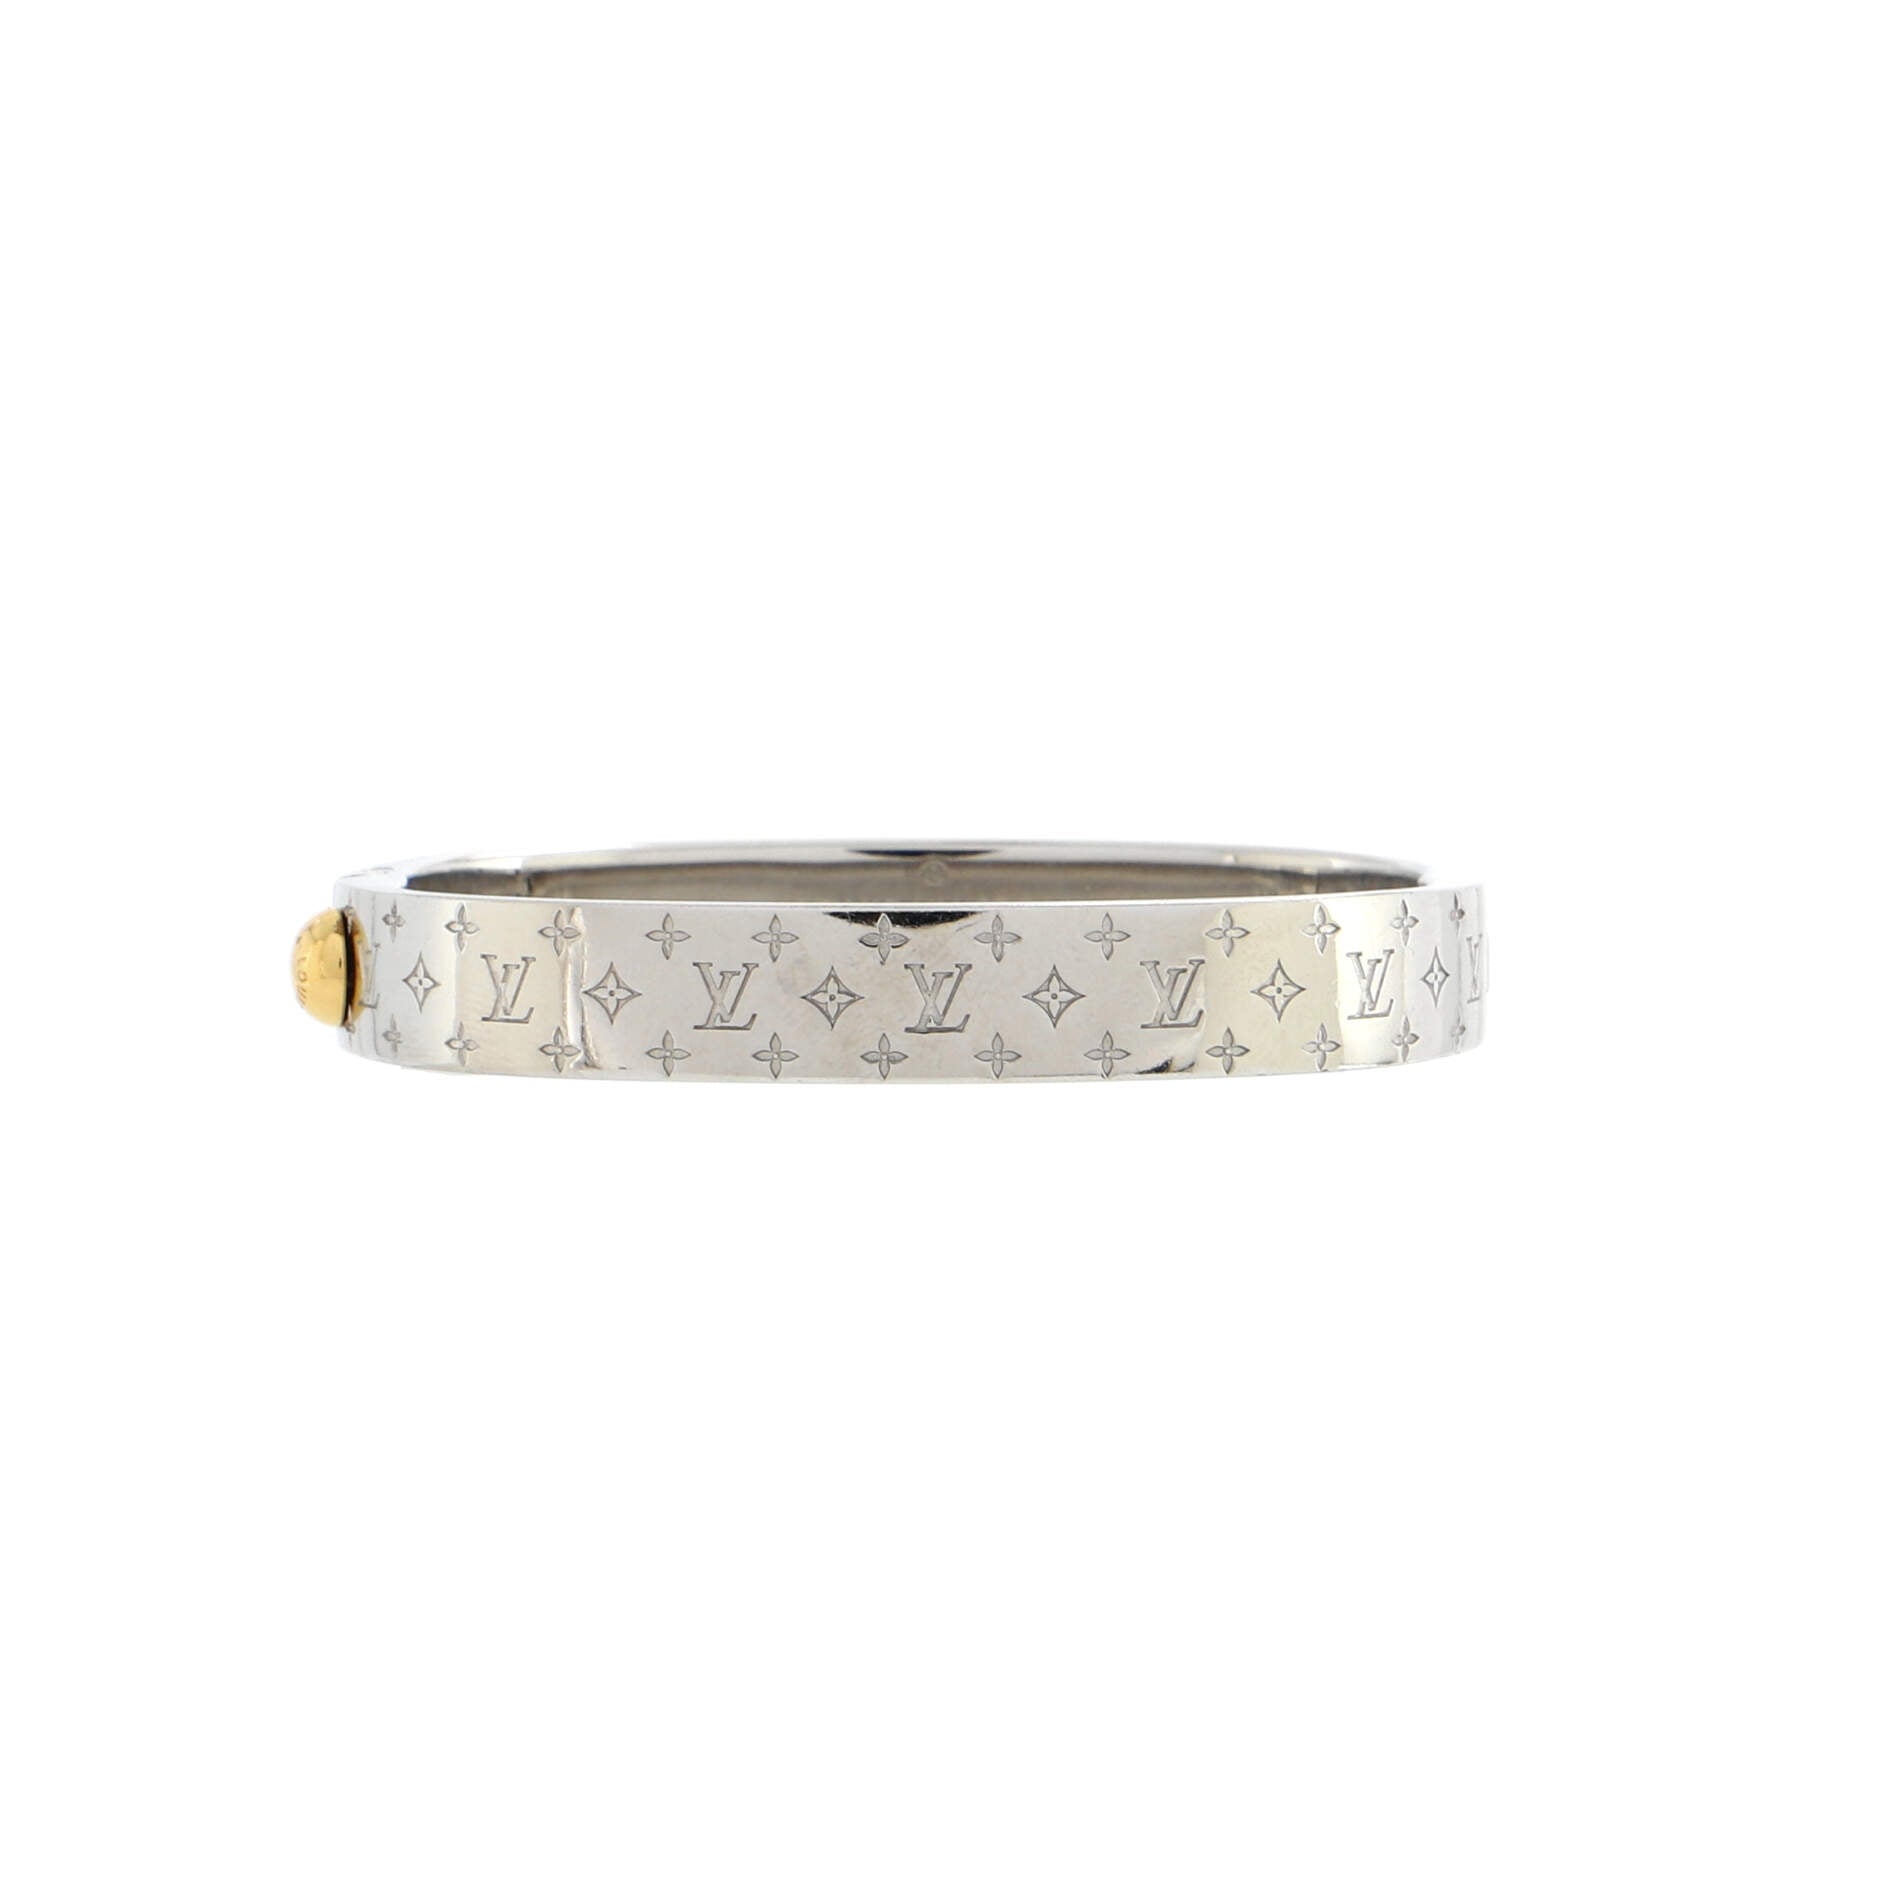 Louis Vuitton Beads Bracelet Cord with Beads, Resin, and Metal Multicolor  13863387